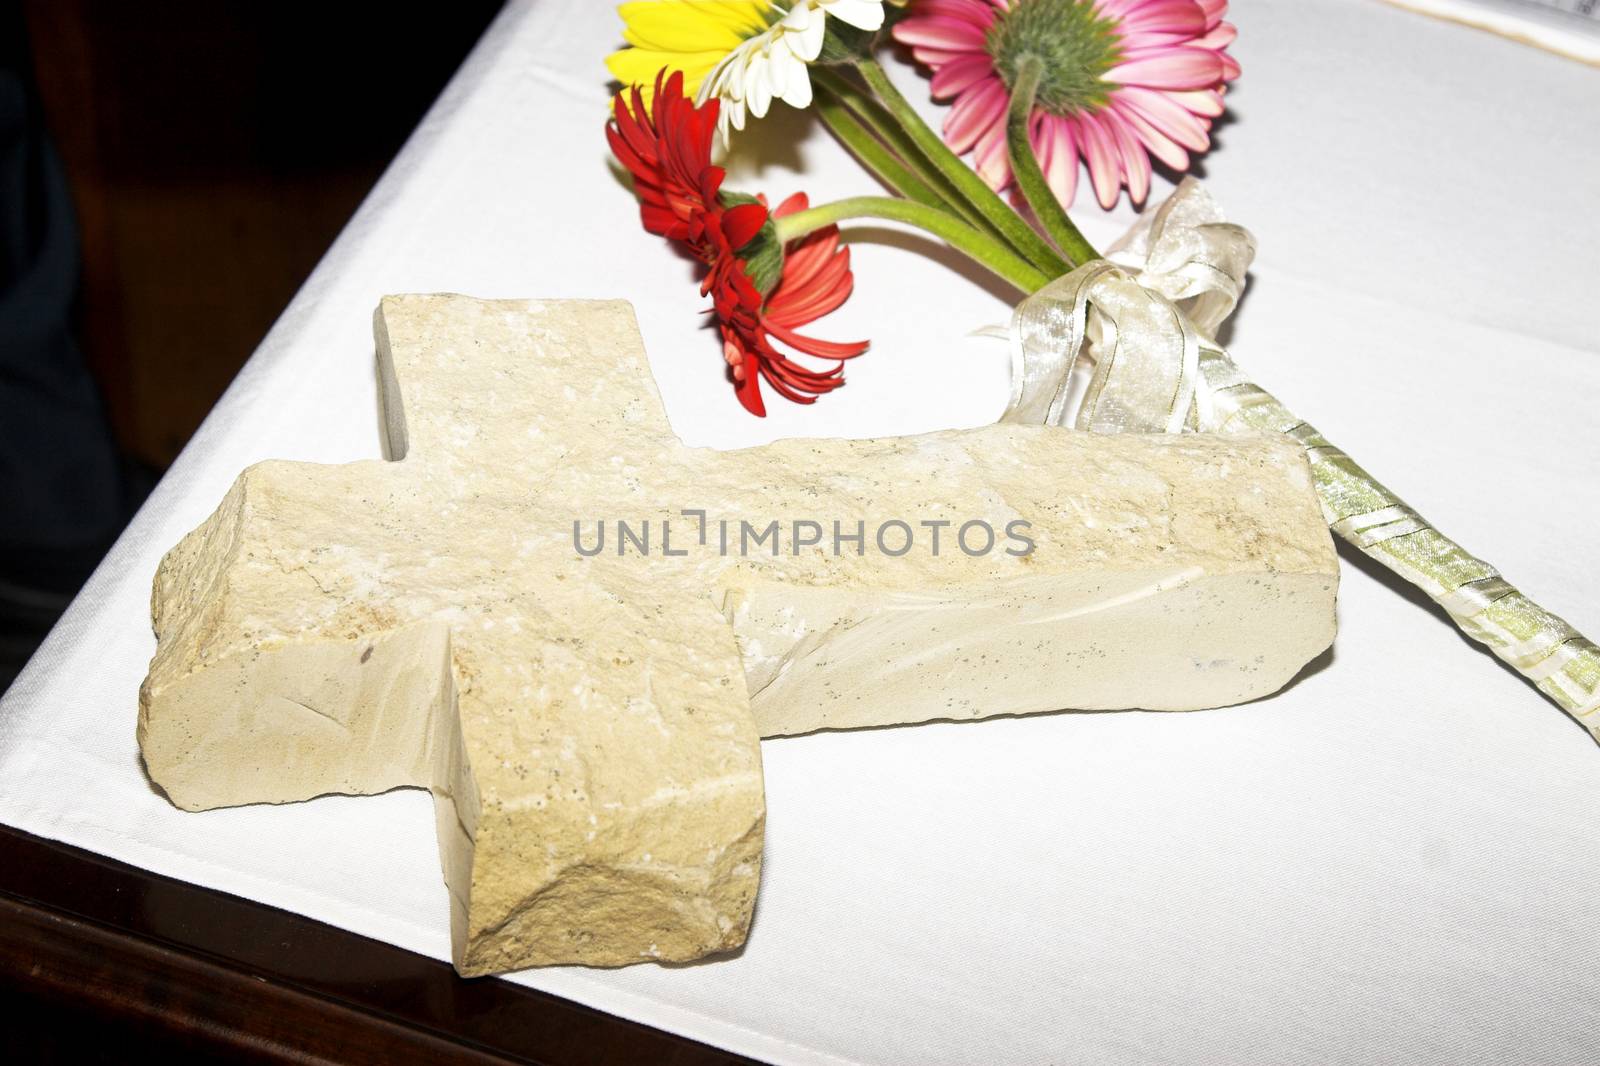 Daisy flowers and ceramic cross on table at wedding